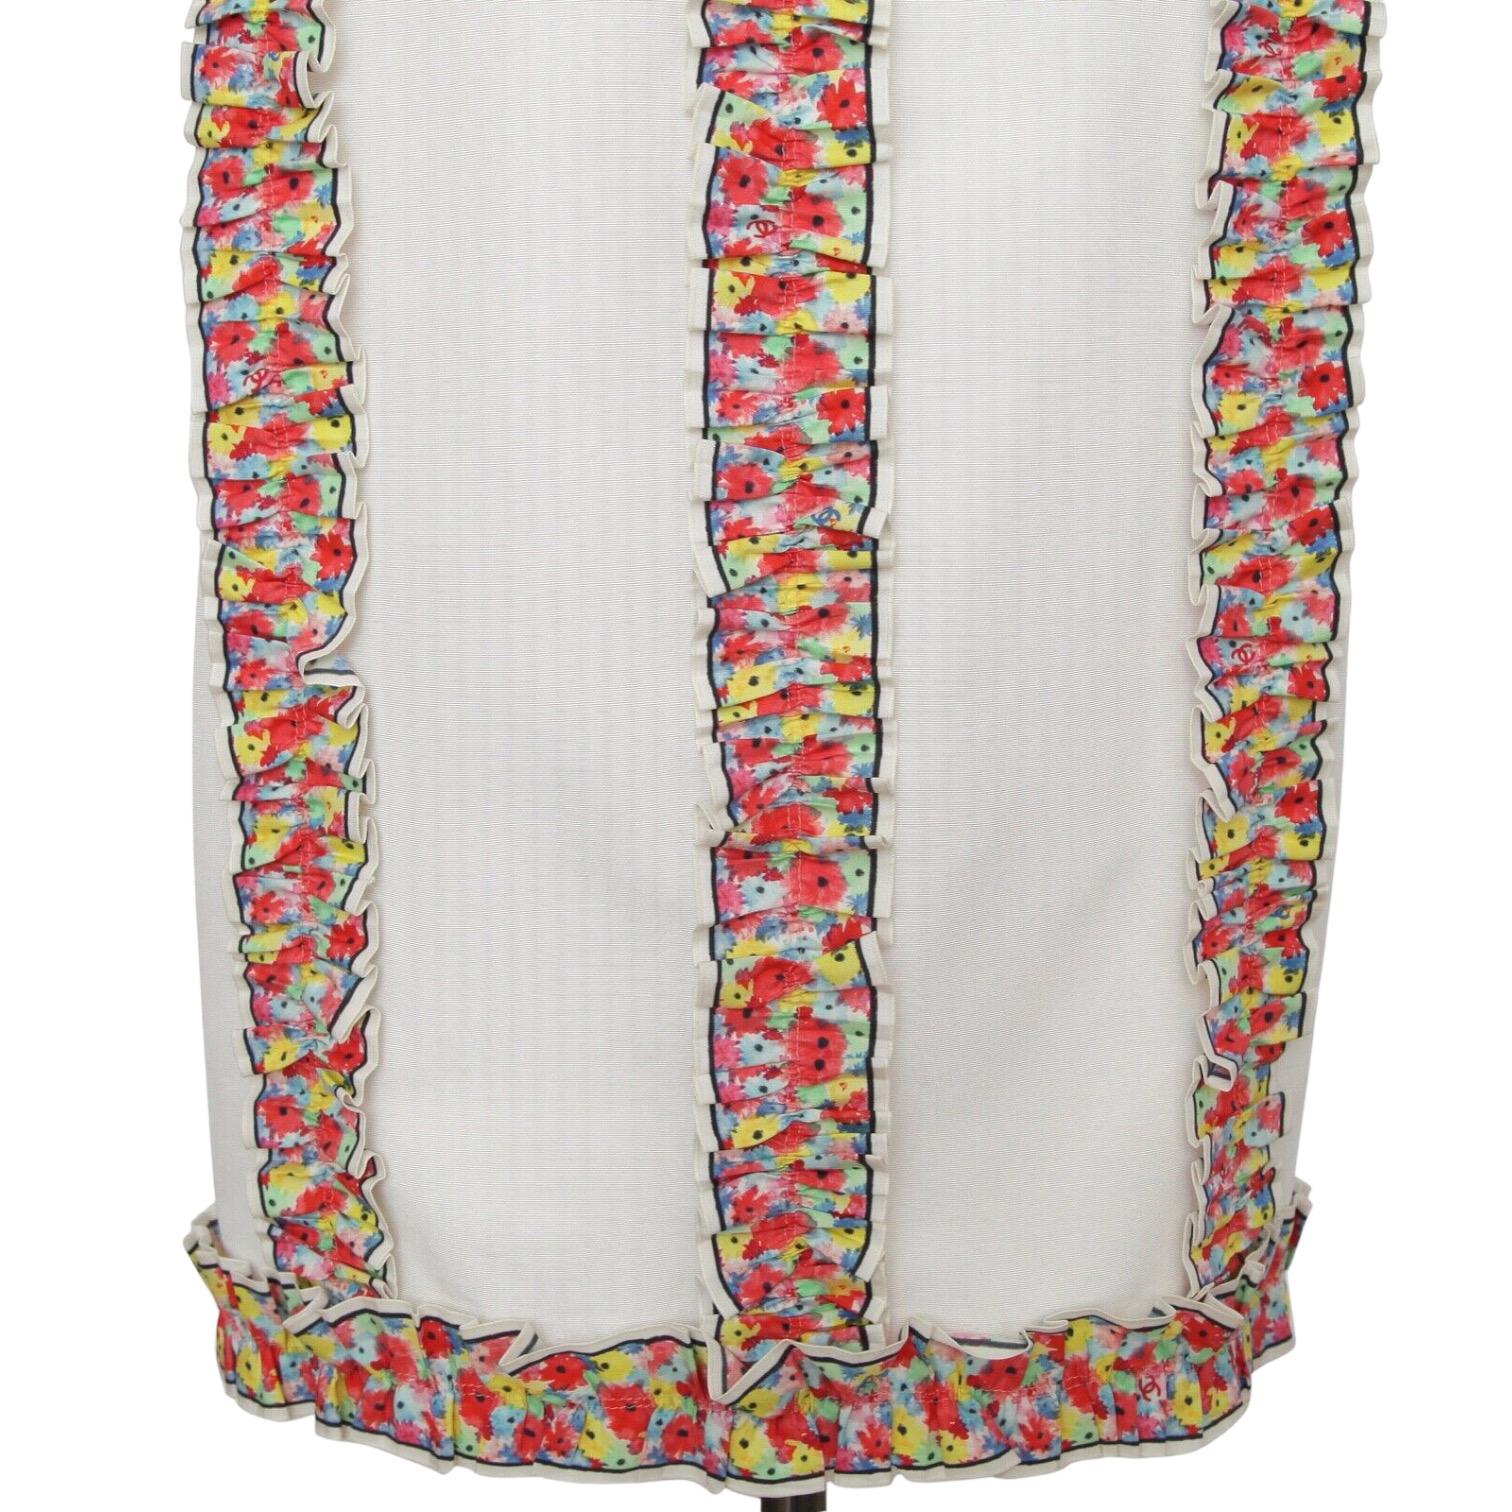 Women's CHANEL Dress White Sleeveless Multicolor Floral Silver HW Collar 42 RUNWAY 2016